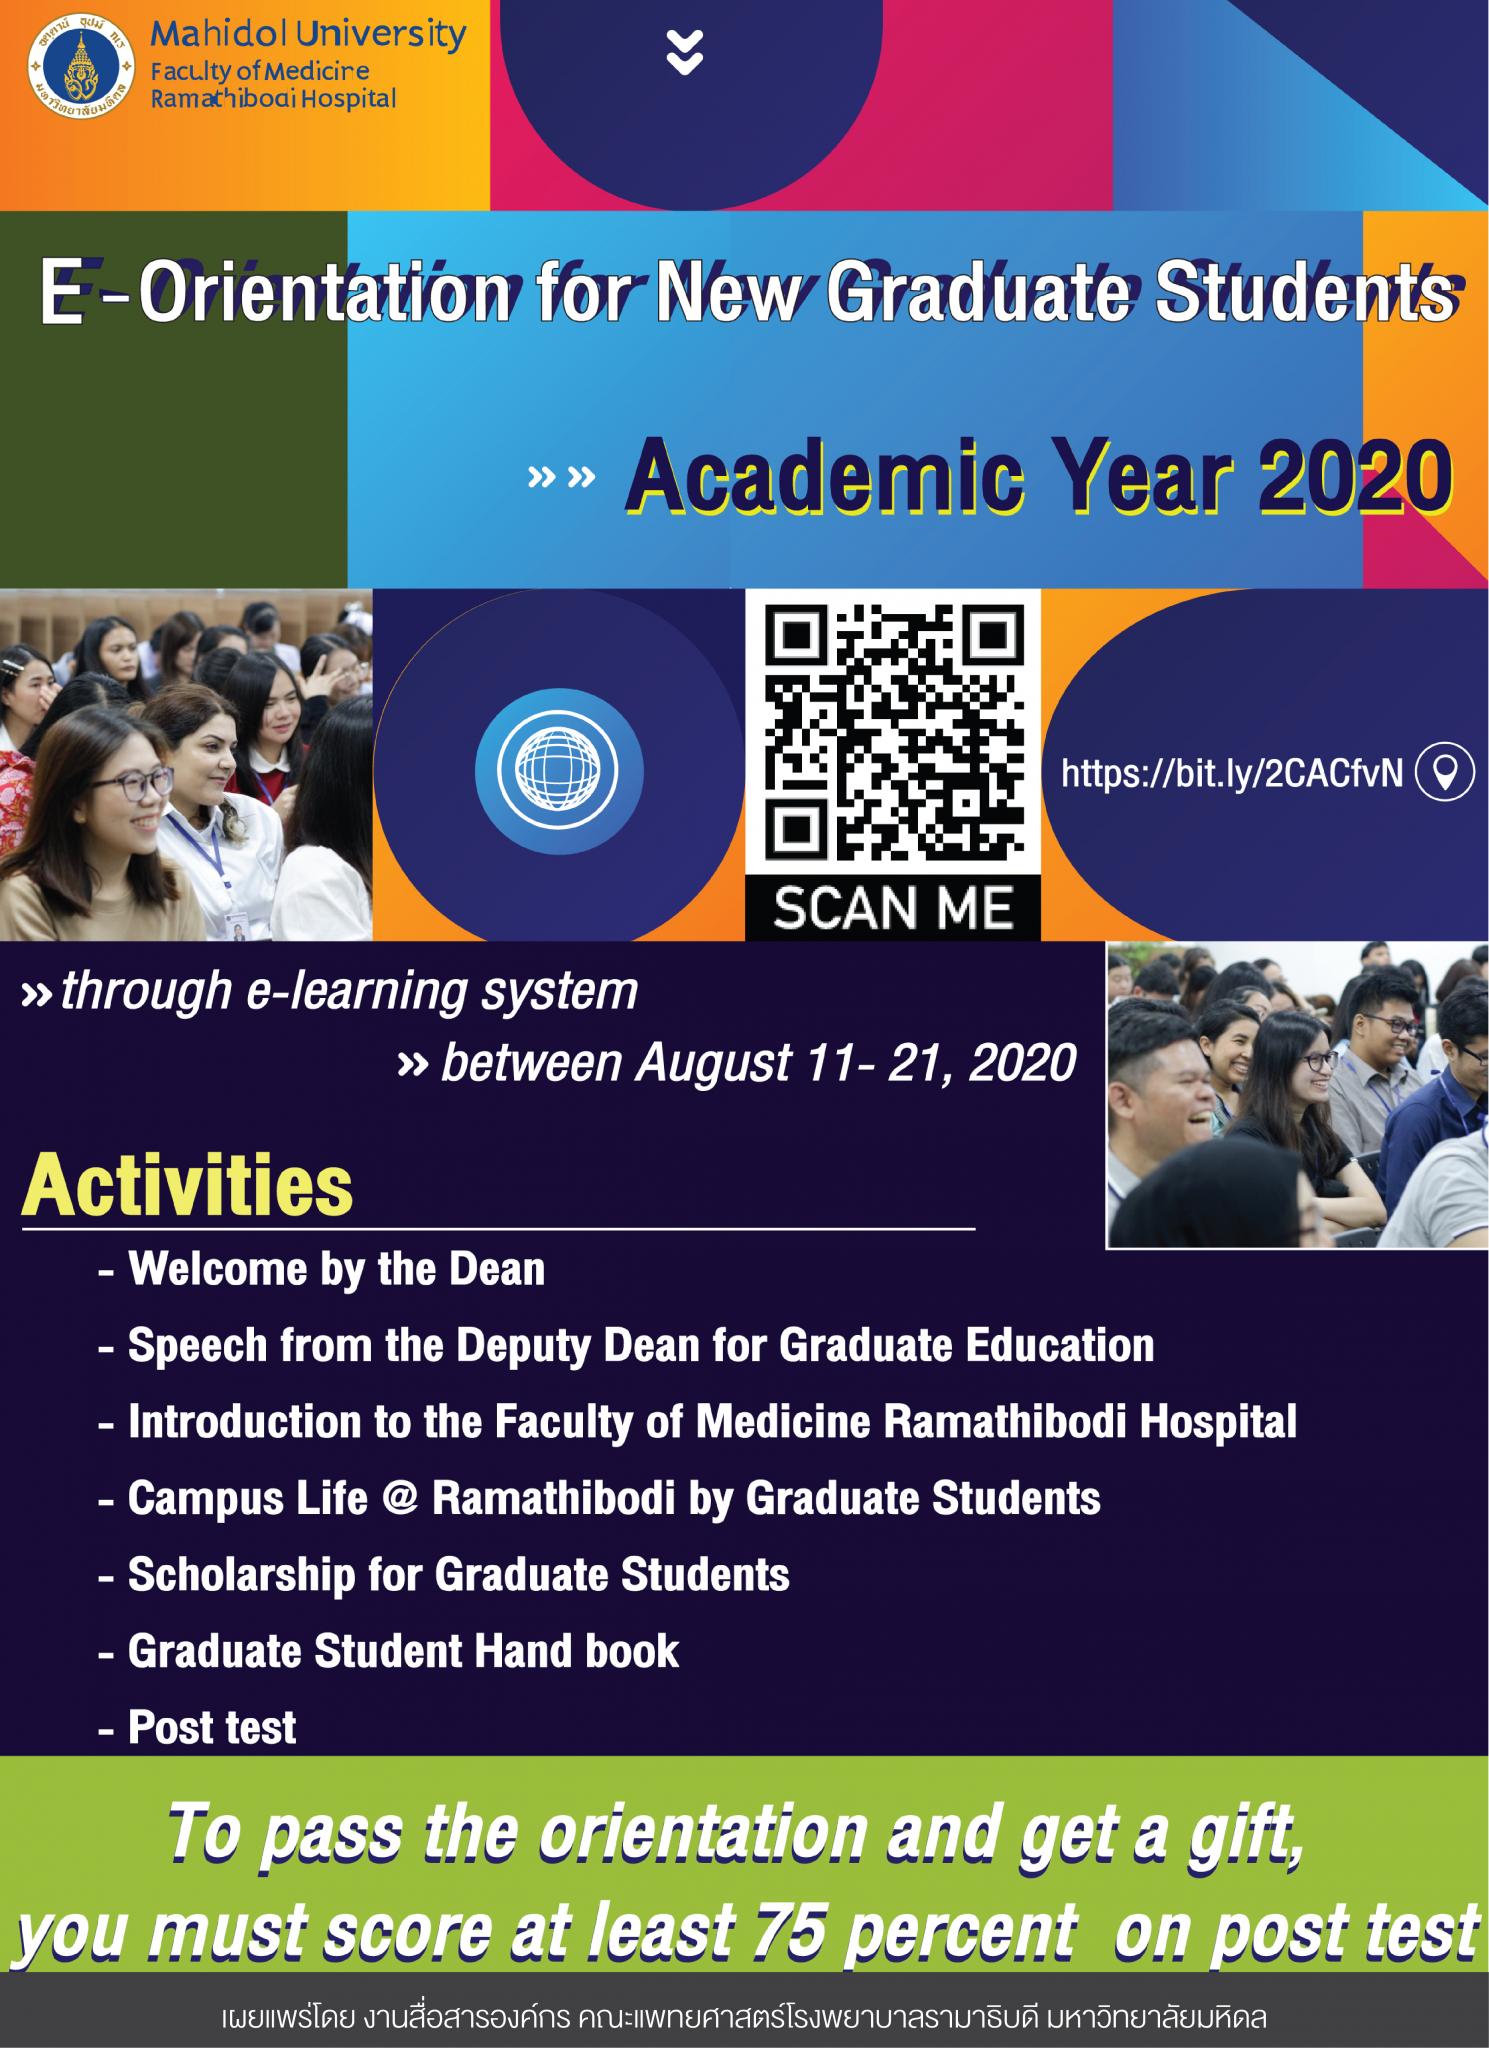 E-Orientation for New Graduate Students Academic Year 2020